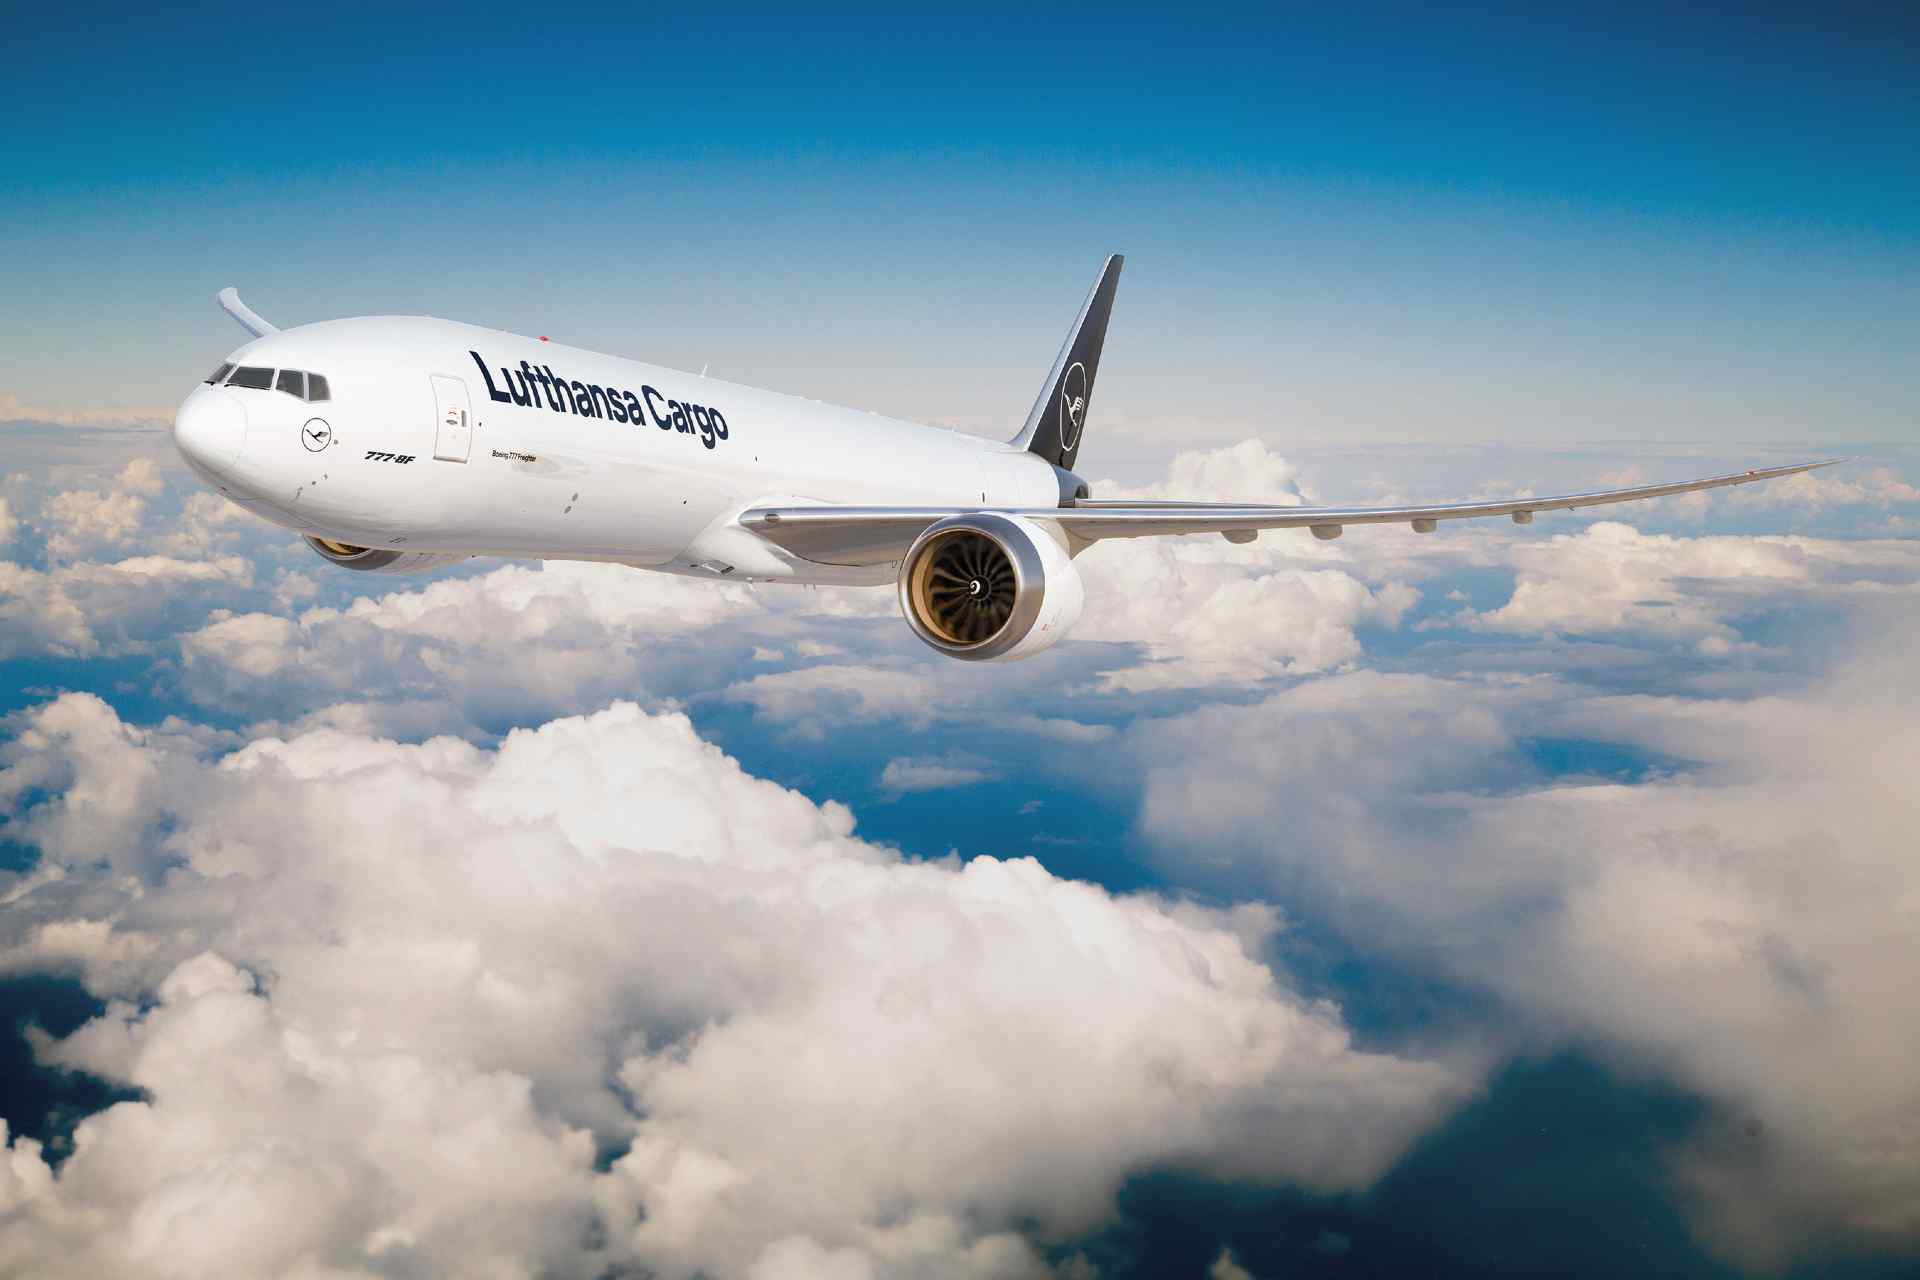 Lufthansa signs order for GE9X, GE90 engines